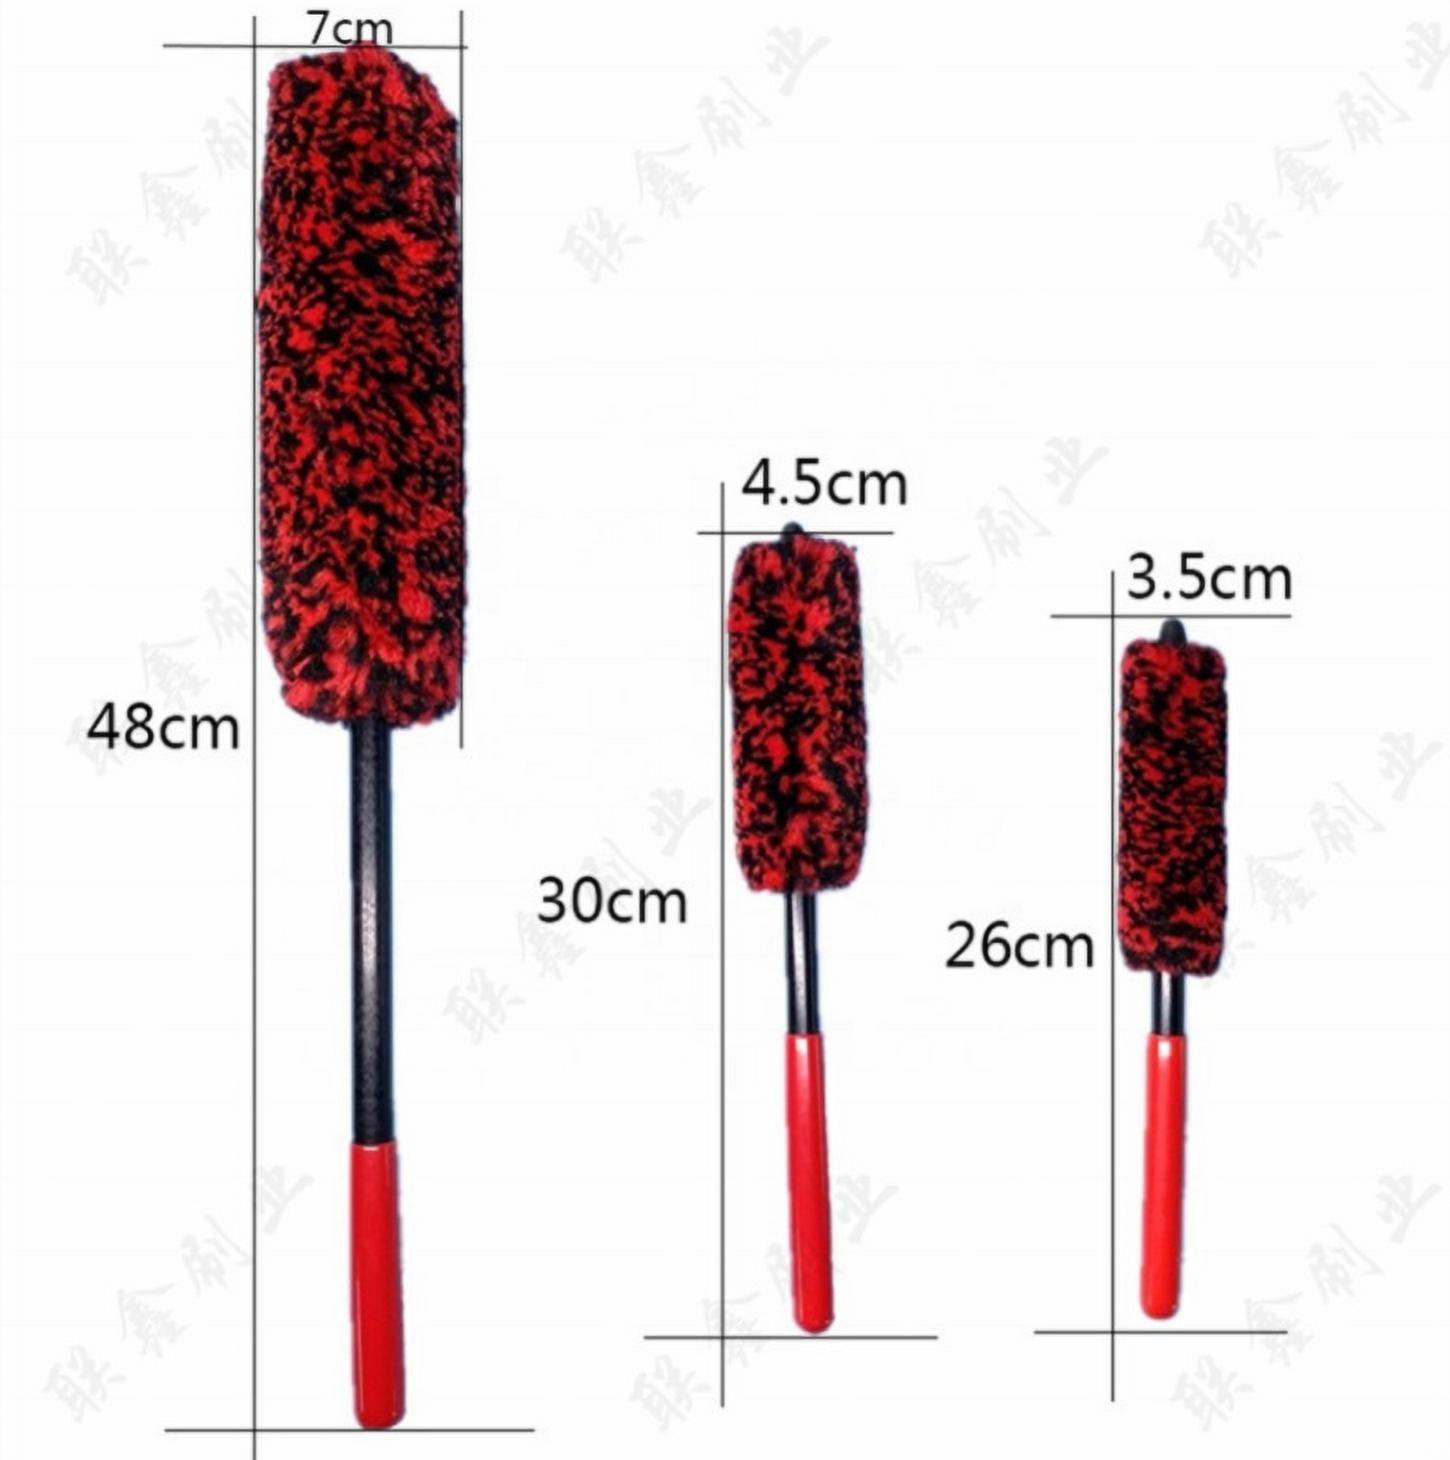 Car Rim Cleaning Wooly Tool Set Wheel Woolies Detailing Brush Tire  Synthetic Woolie Brush 3-Piece Kit for Car Alloy Wheel, Air Vent, Engine,  Dashboard, Interior, Exterior - Black & red 